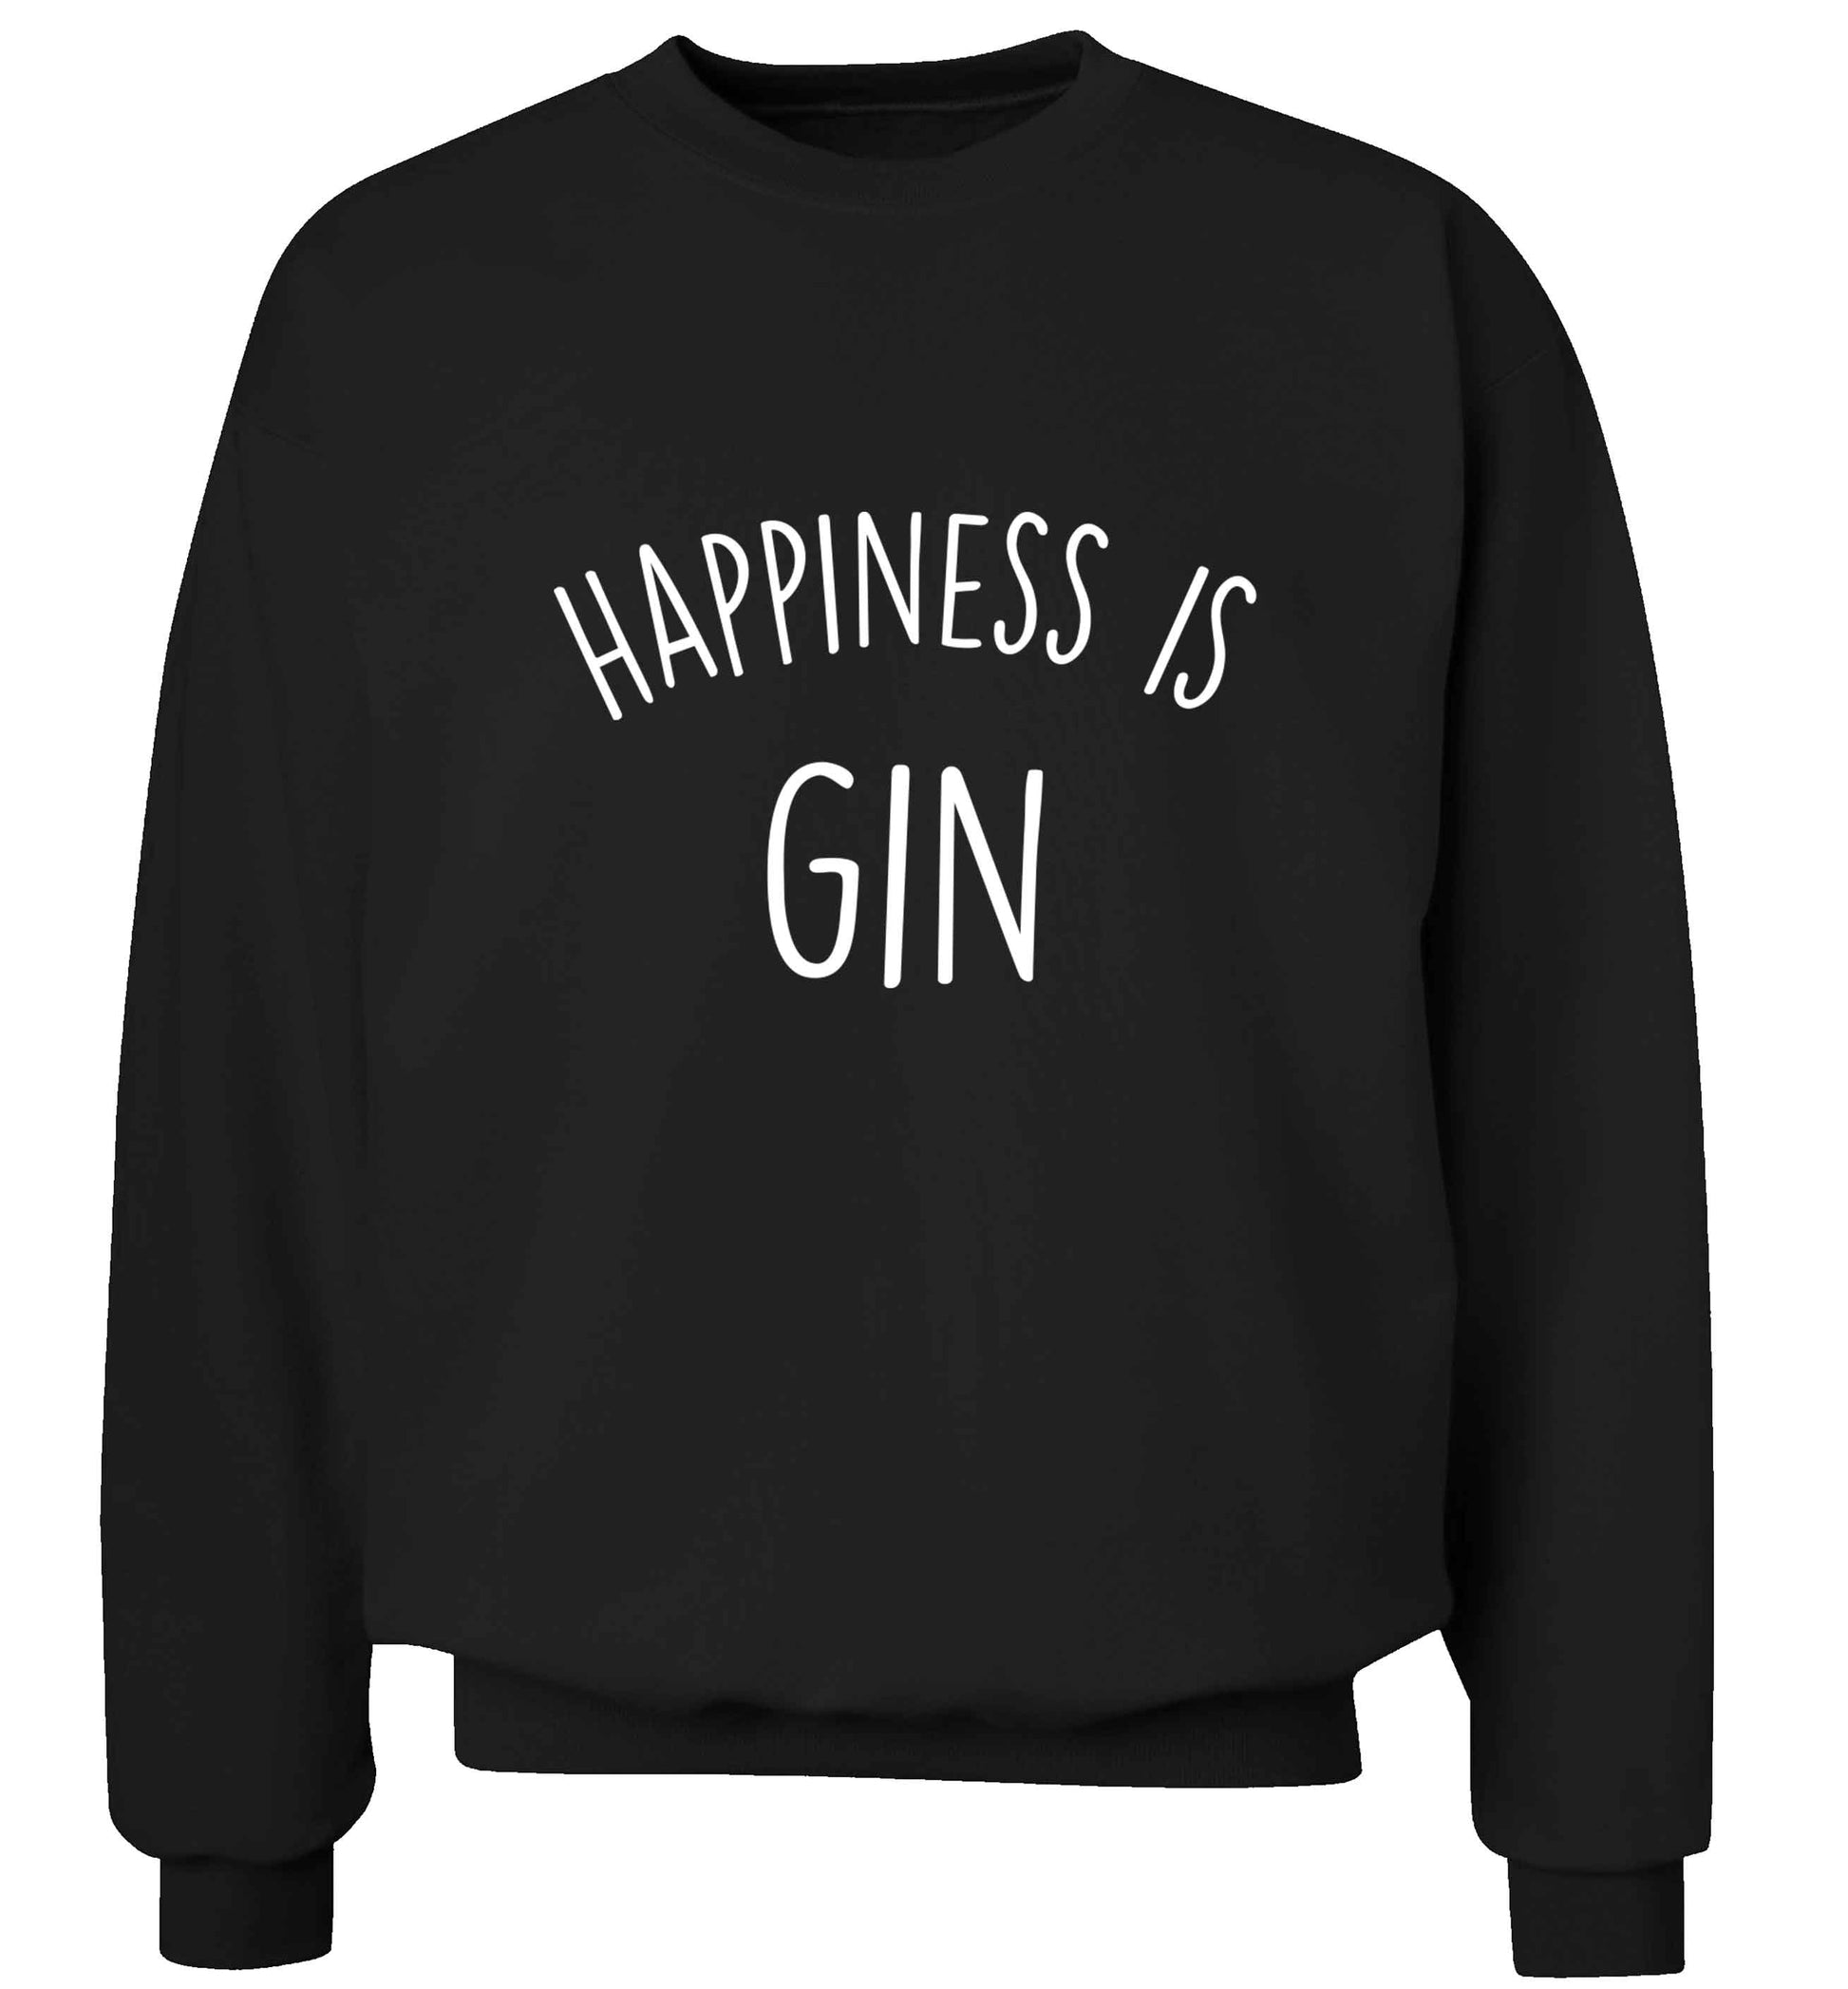 Happiness is gin adult's unisex black sweater 2XL